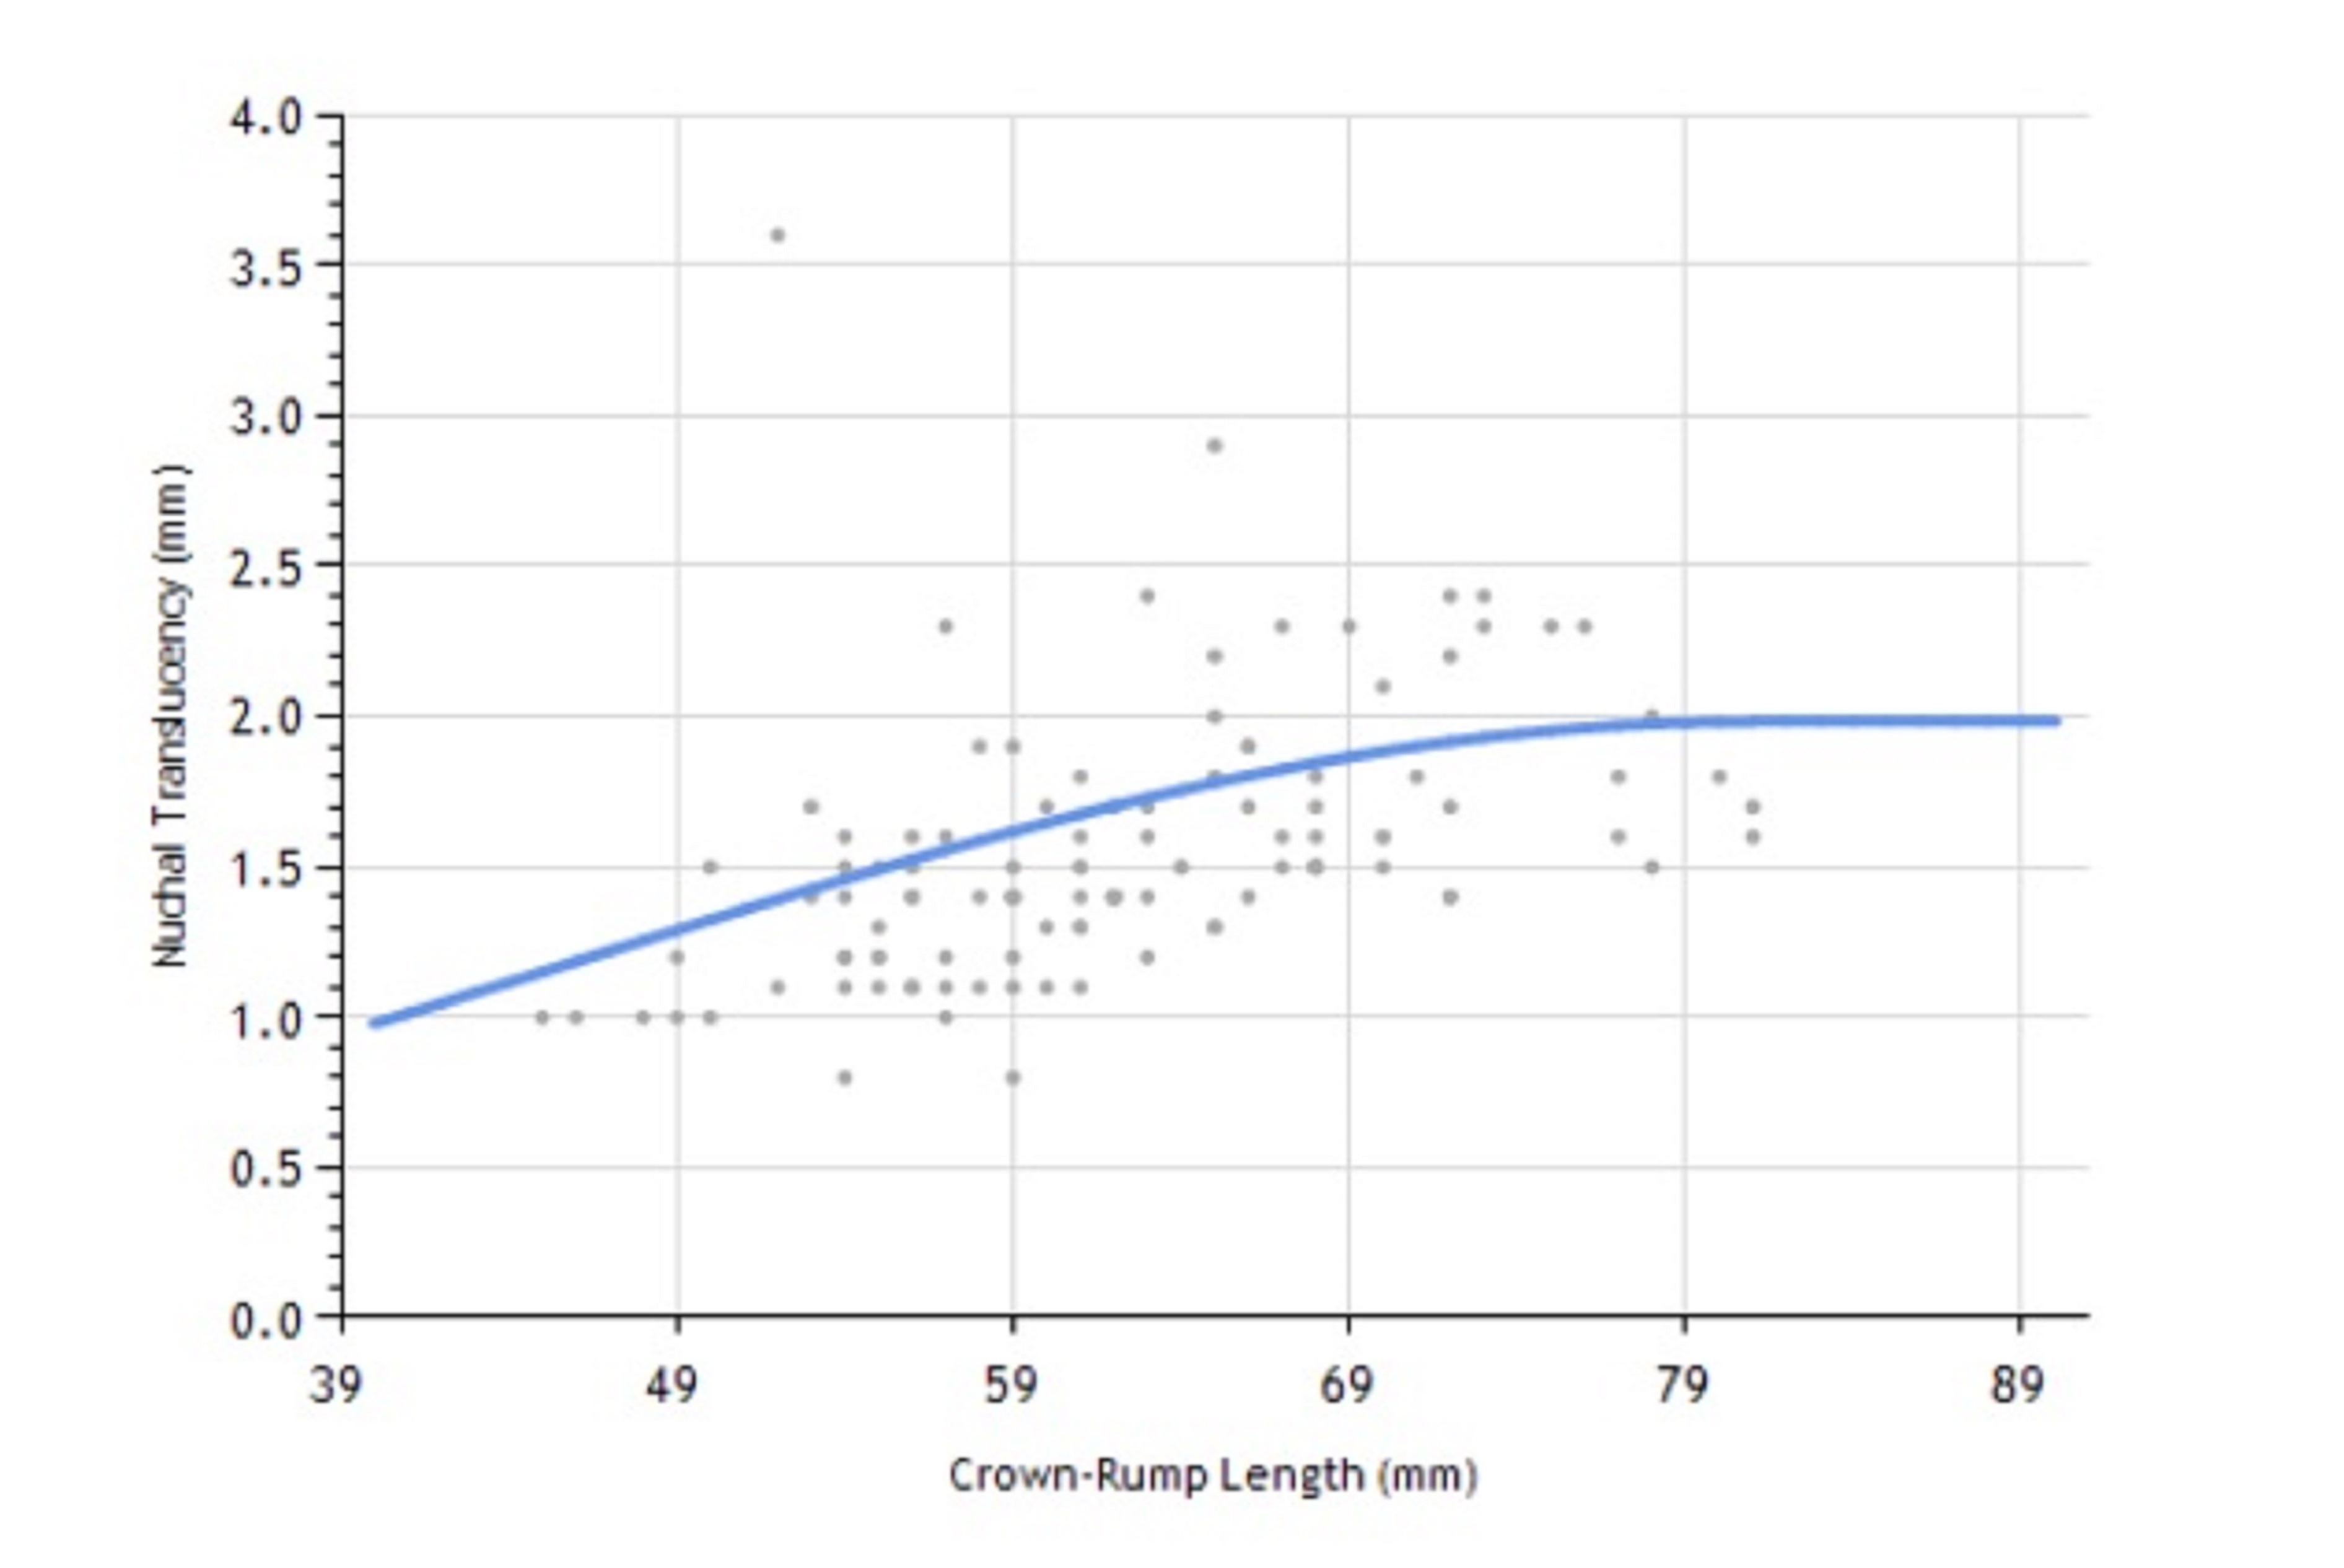 scatter plot of crown-rump lengths and nuchal translucencies